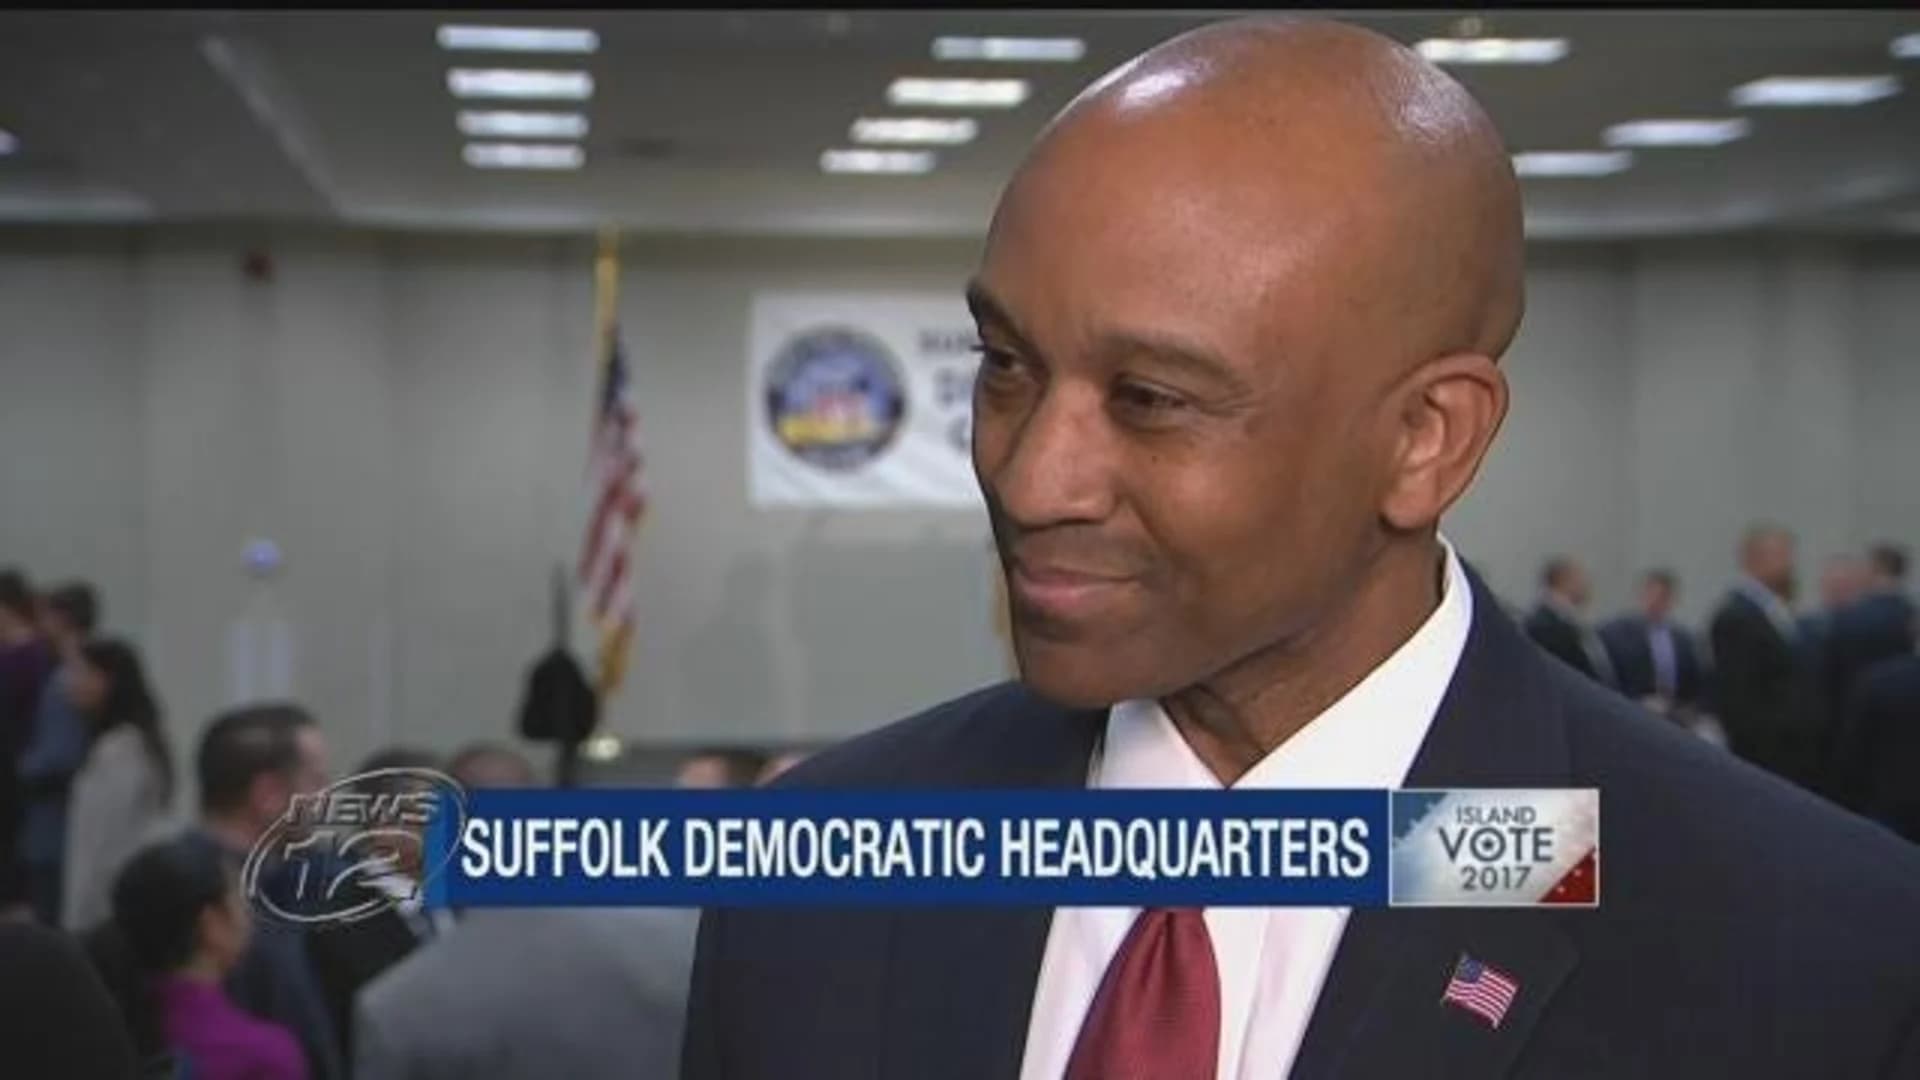 No new sheriff in town: Suffolk race too close to call